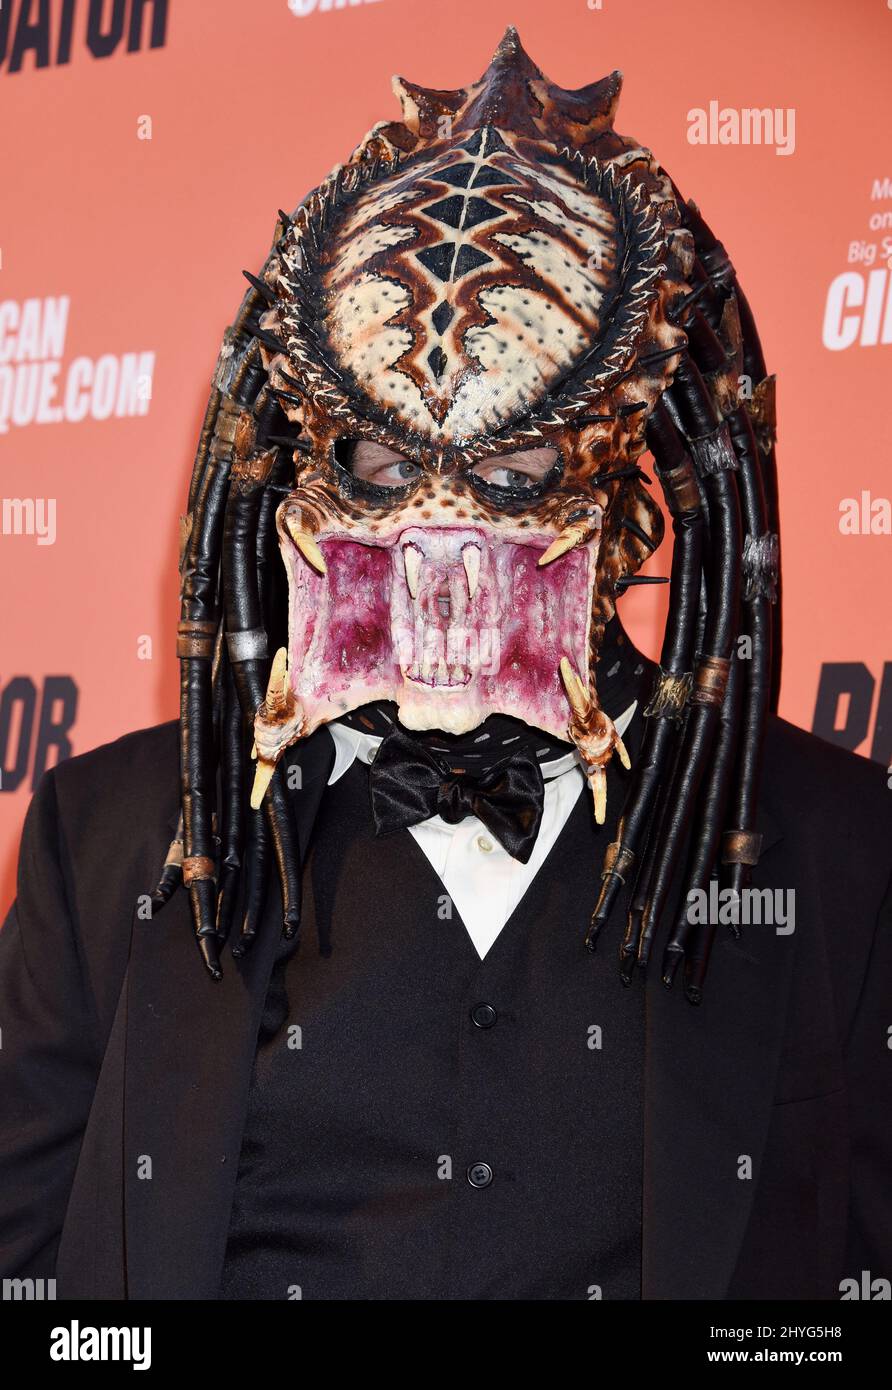 The Predator at 'The Predator' Special Screening Event held at the Egyptian Theatre on September 12, 2018 in Hollywood, CA. Stock Photo